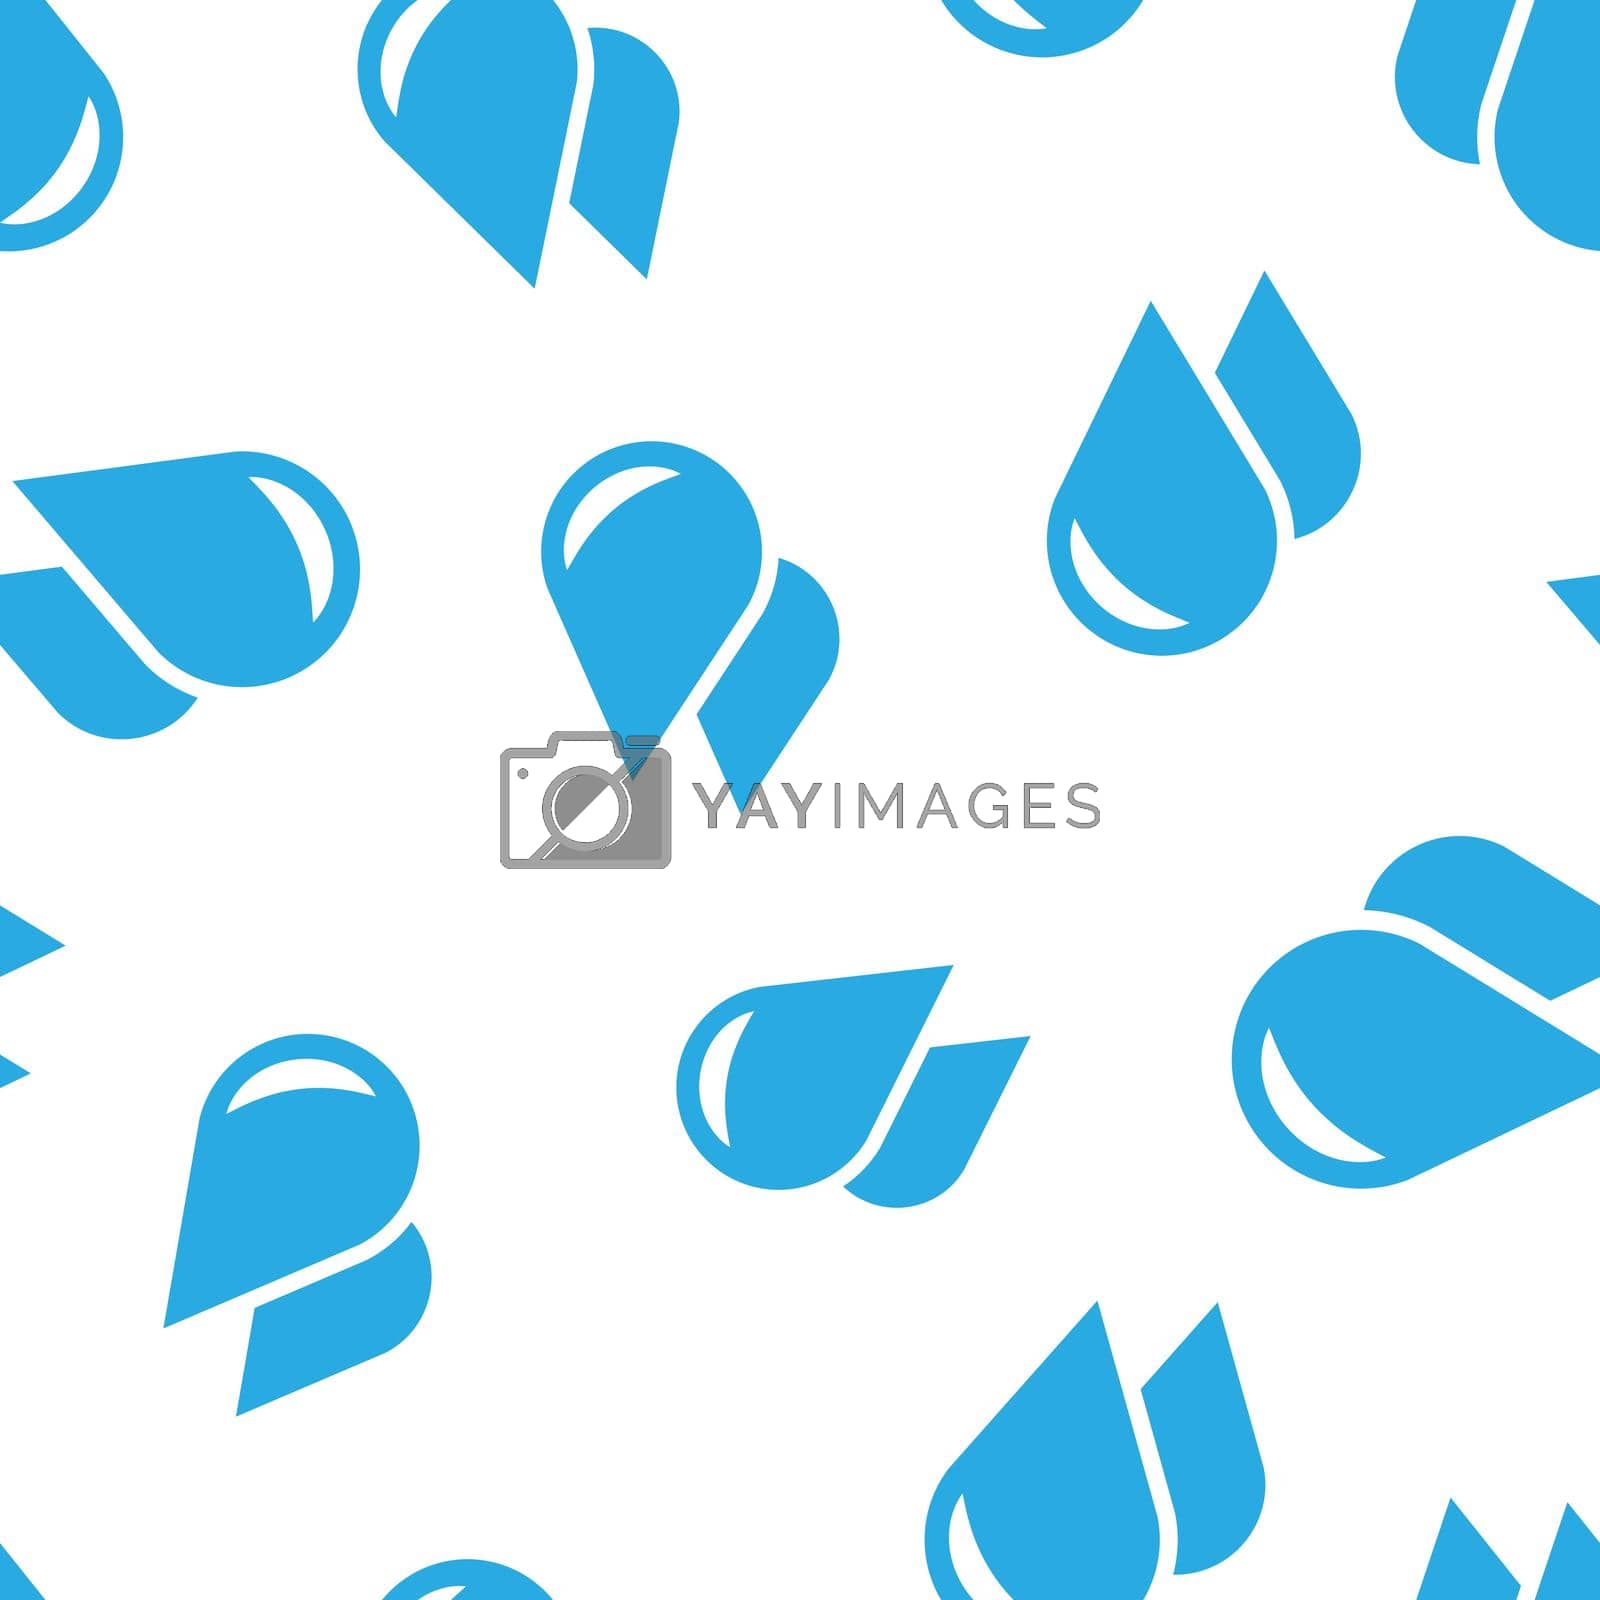 Royalty free image of Water drop icon seamless pattern background. Raindrop vector illustration. Droplet water blob symbol pattern. by LysenkoA